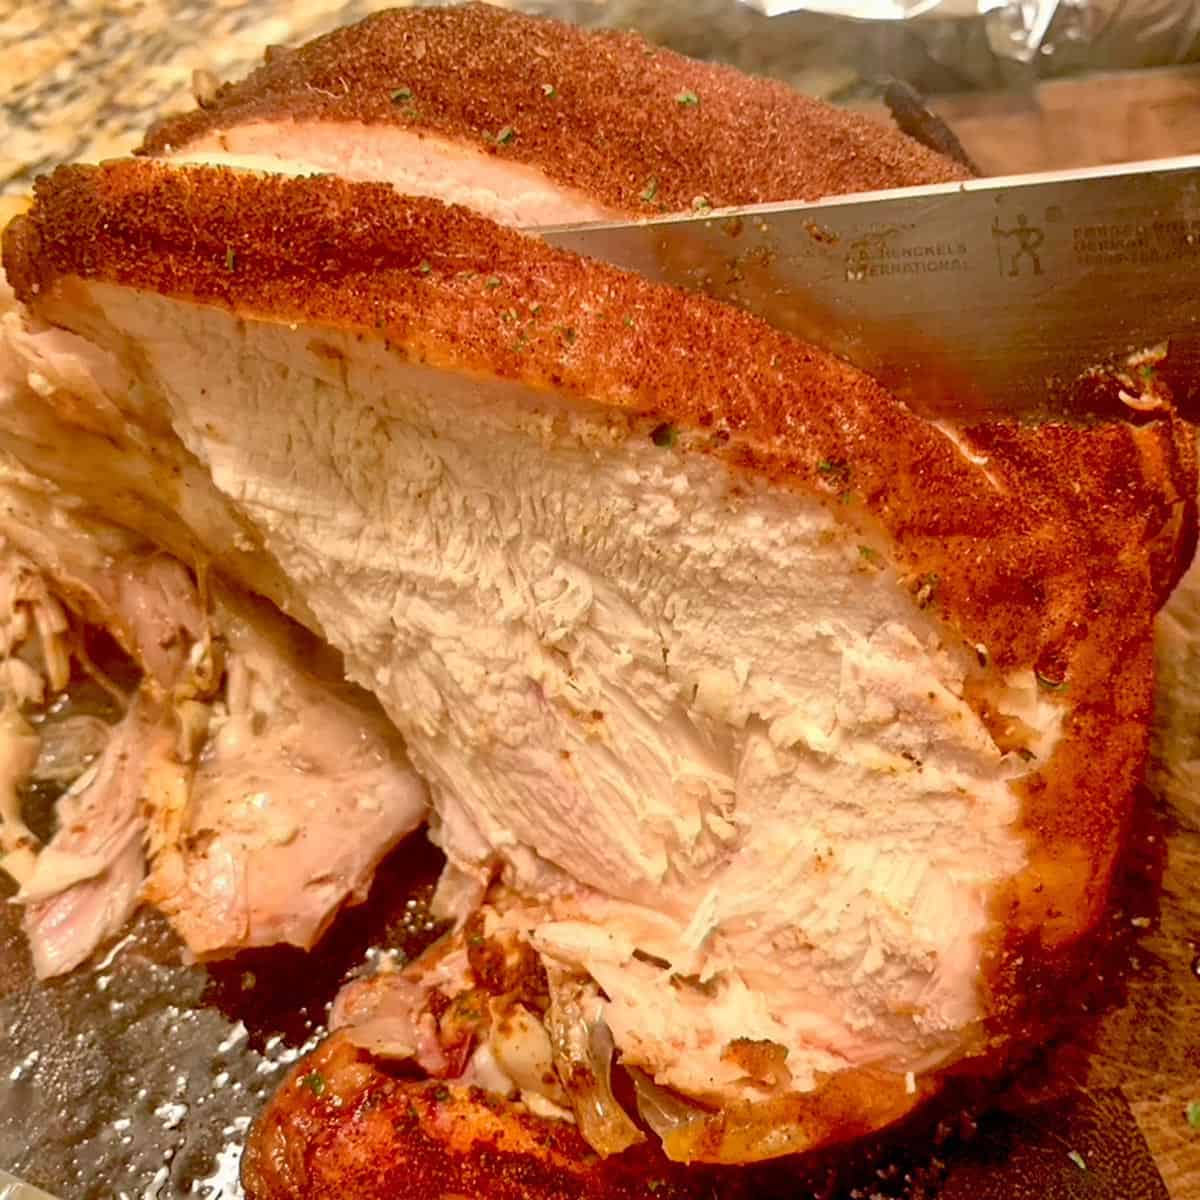 Slicing into some smoked chicken breast.